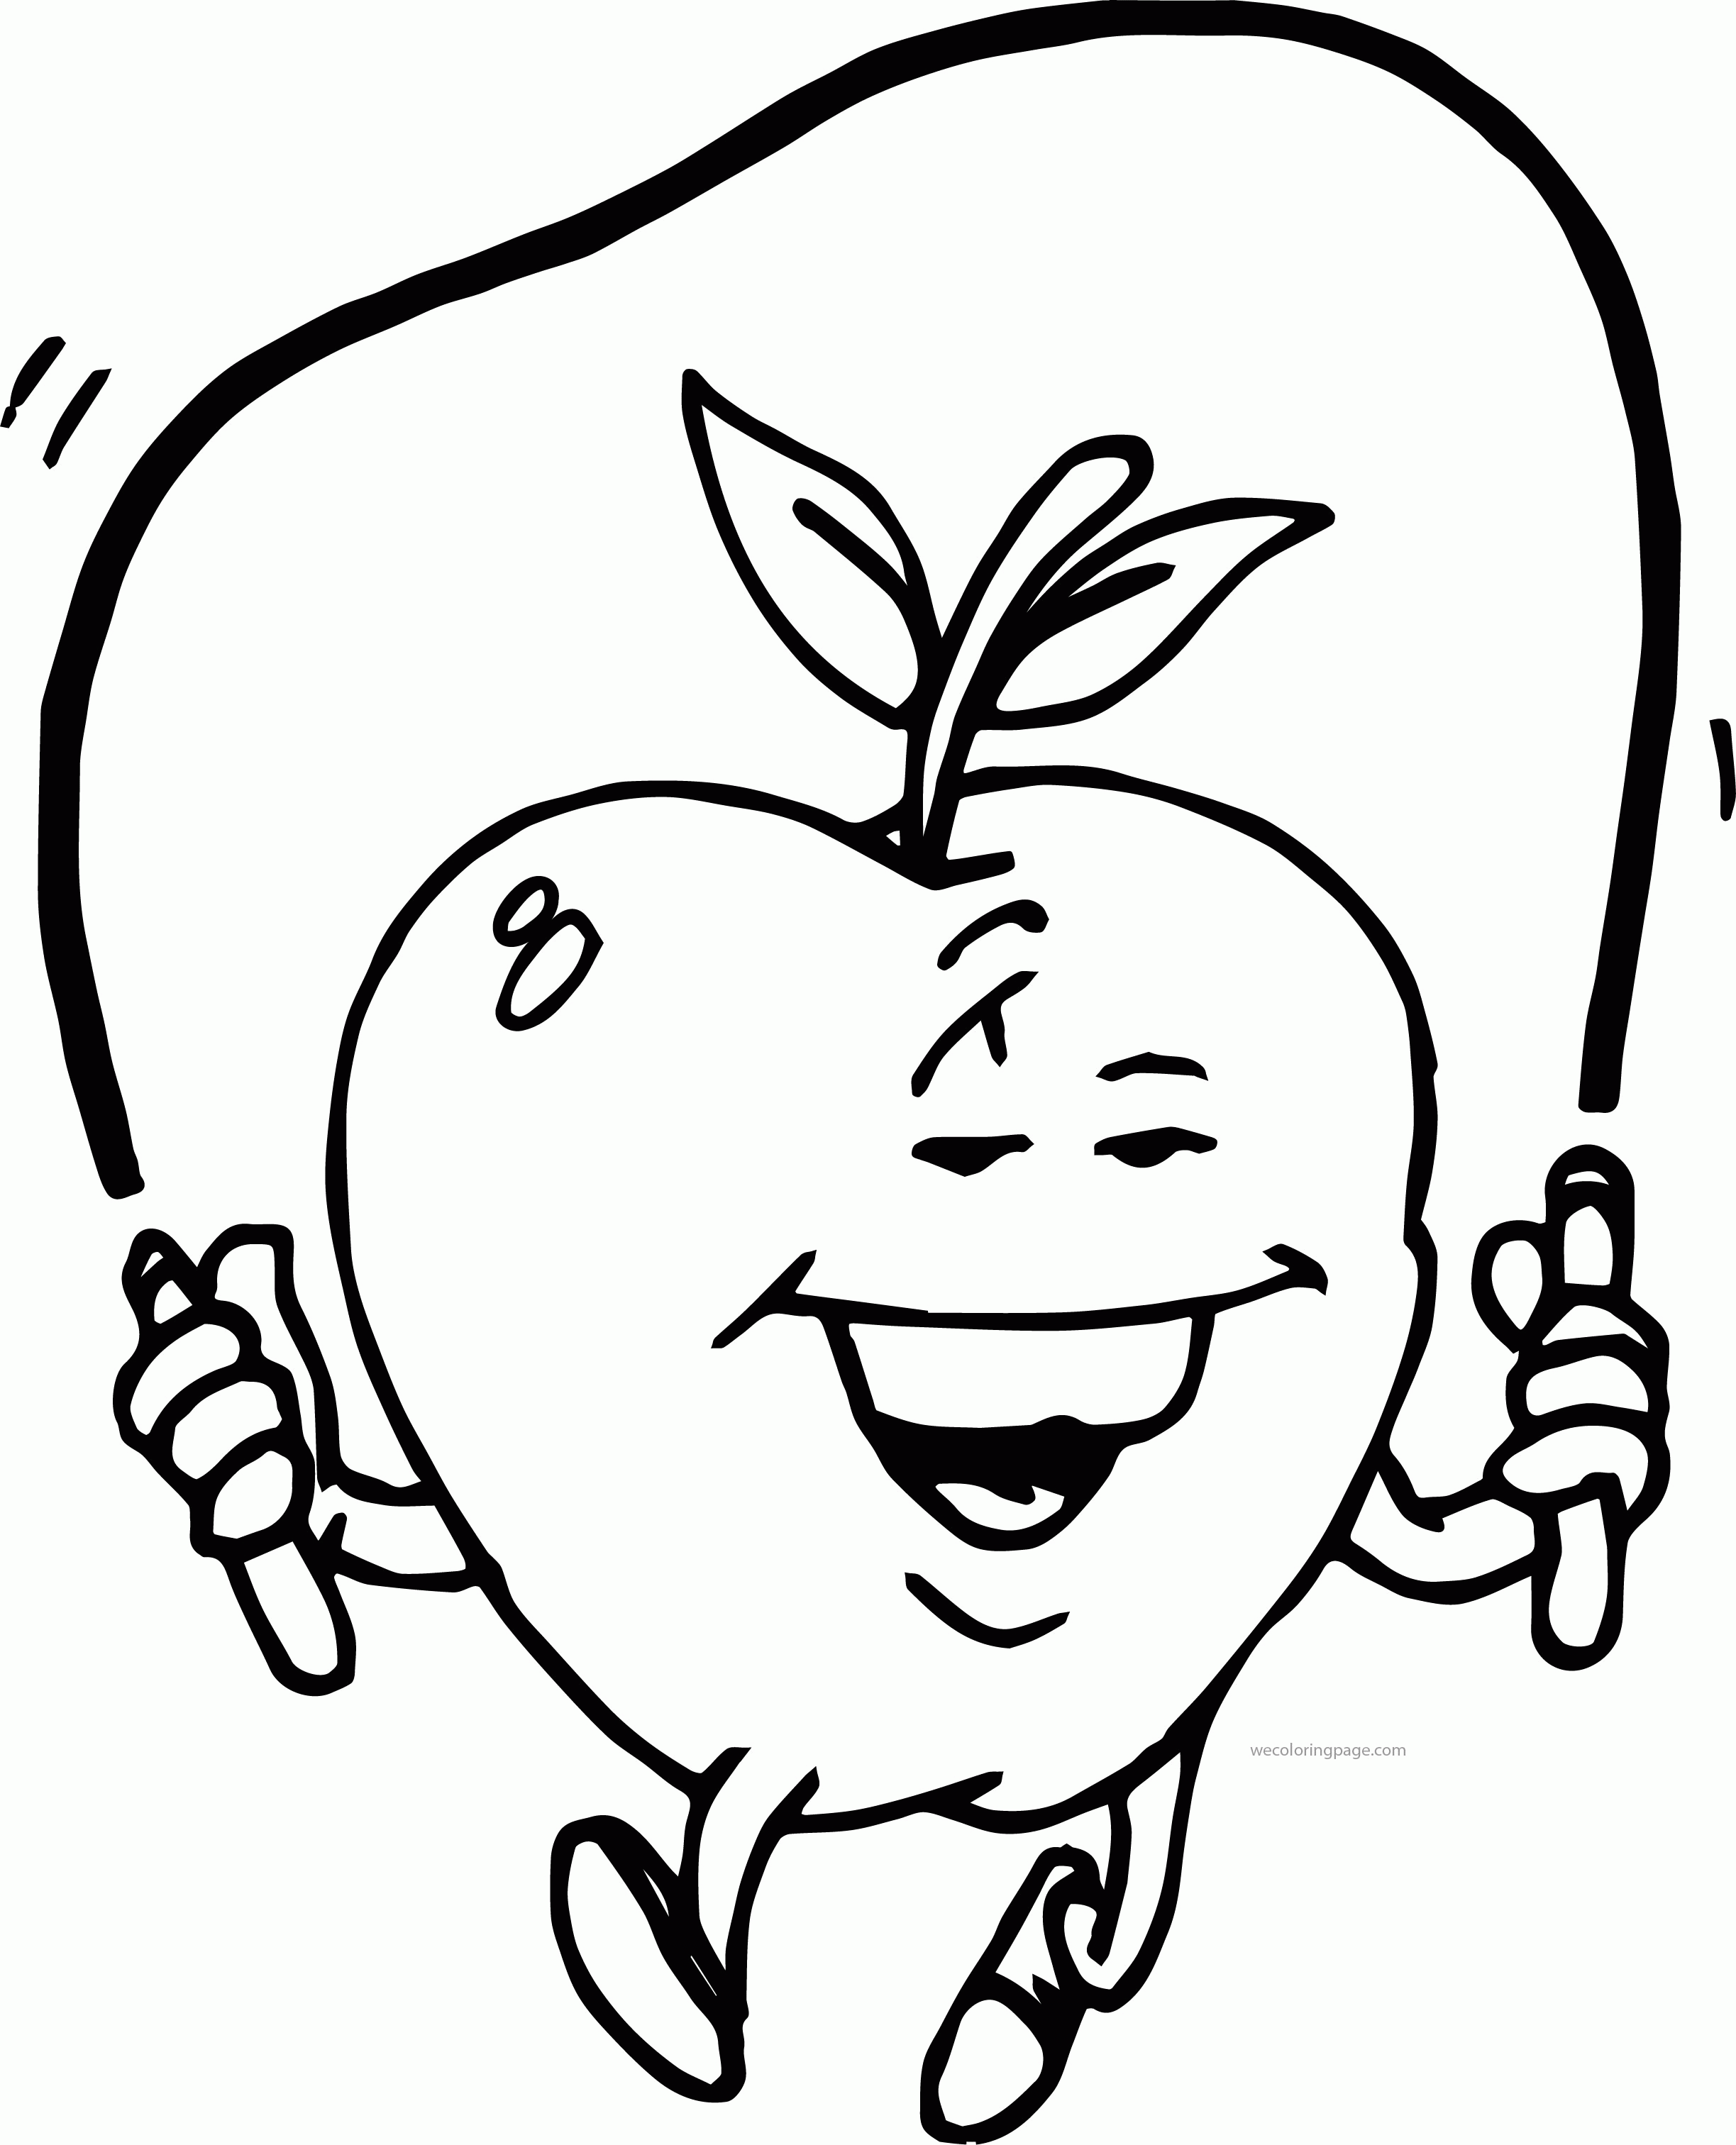 Cartoon Apple Jump Rope Coloring Page | Wecoloringpage